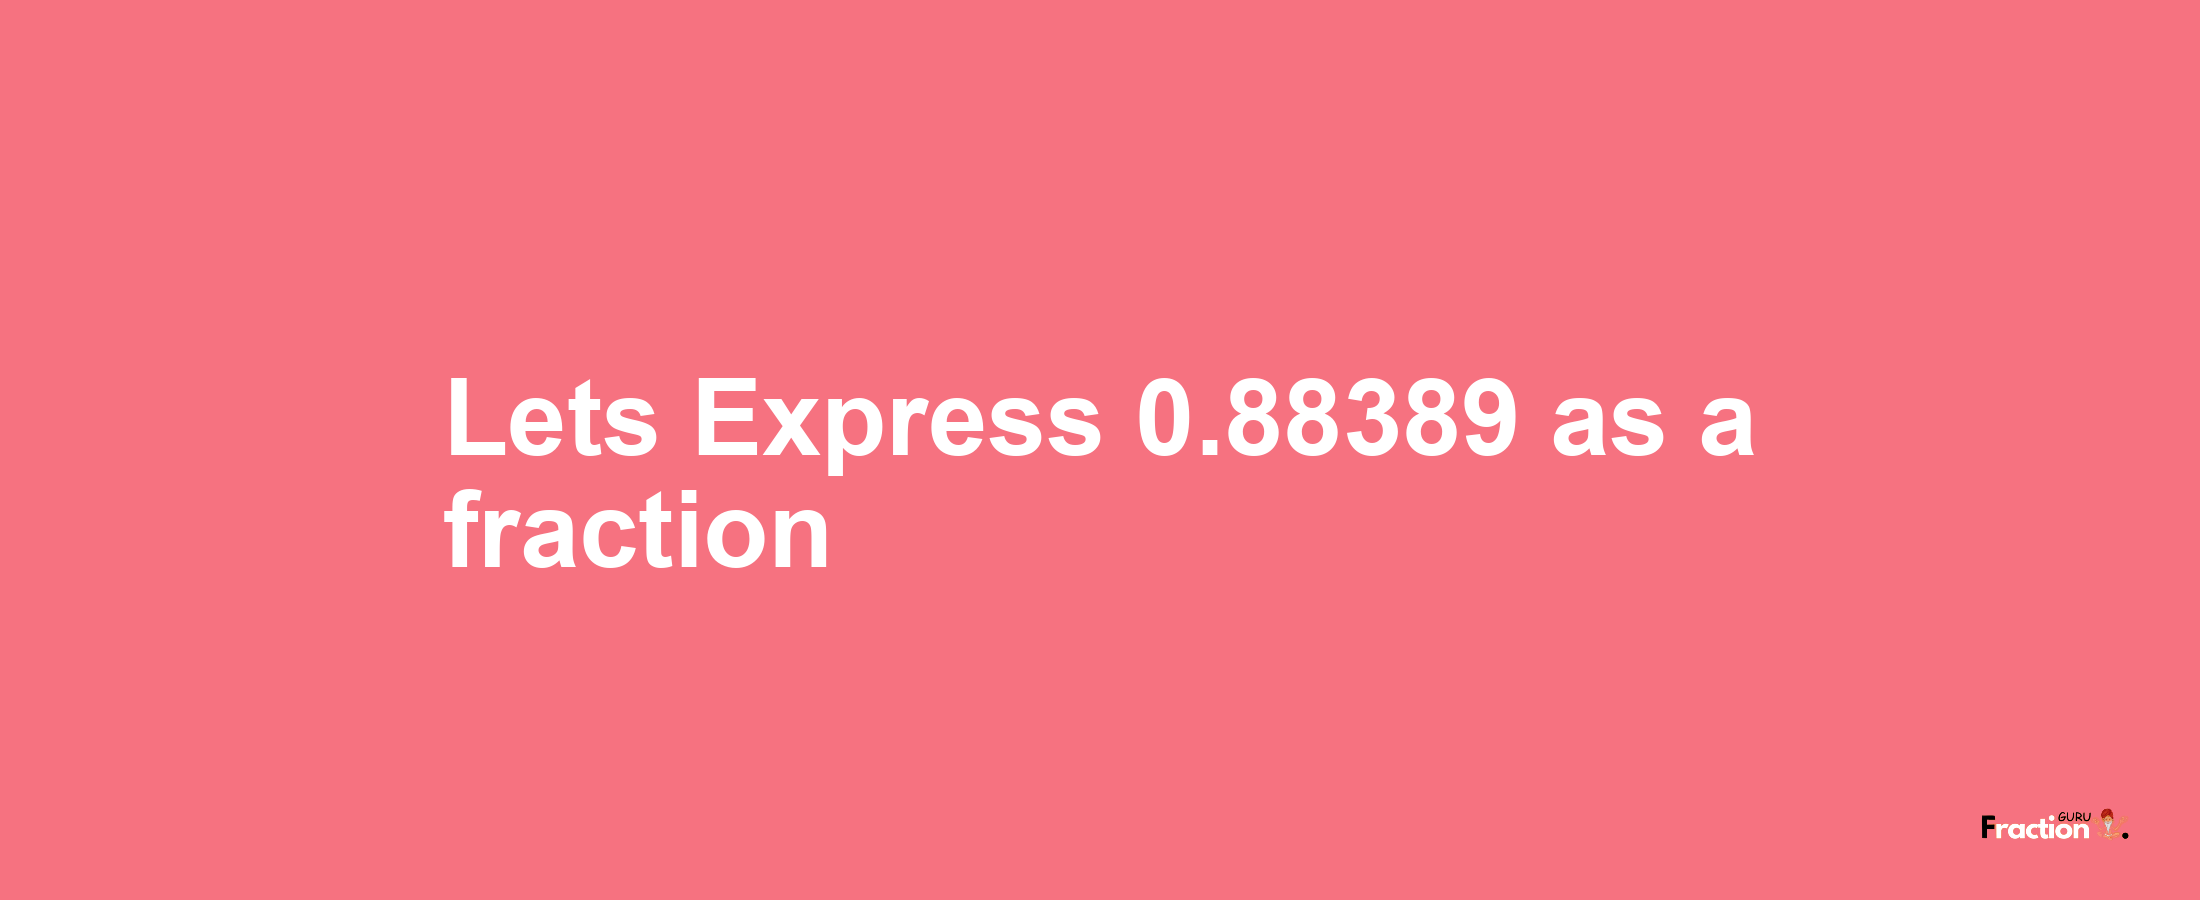 Lets Express 0.88389 as afraction